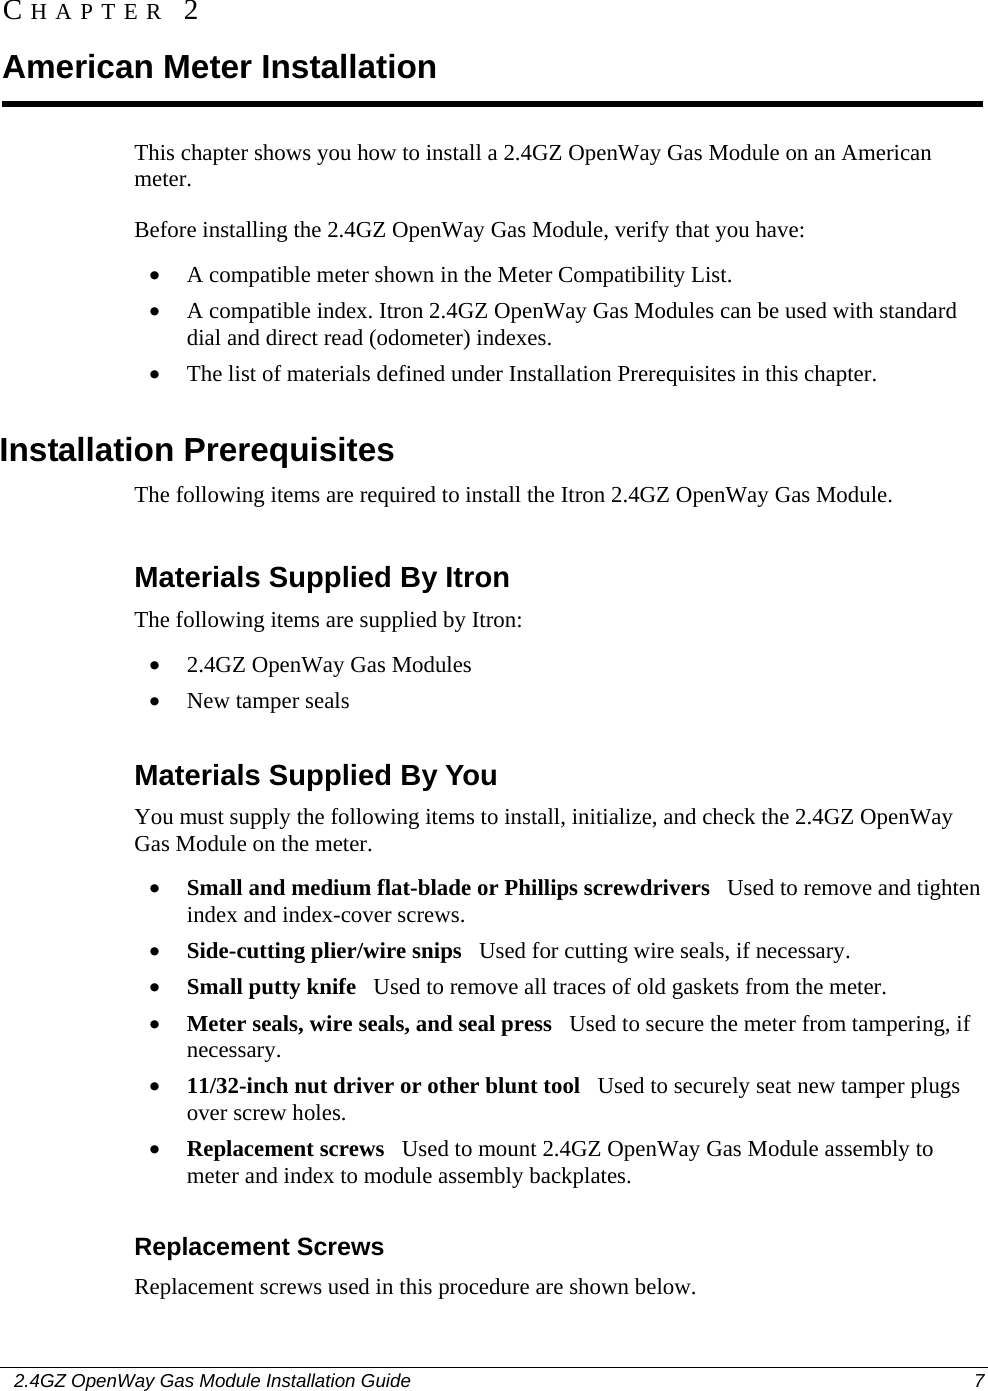    2.4GZ OpenWay Gas Module Installation Guide  7  This chapter shows you how to install a 2.4GZ OpenWay Gas Module on an American meter. Before installing the 2.4GZ OpenWay Gas Module, verify that you have: • A compatible meter shown in the Meter Compatibility List. • A compatible index. Itron 2.4GZ OpenWay Gas Modules can be used with standard dial and direct read (odometer) indexes. • The list of materials defined under Installation Prerequisites in this chapter.  Installation Prerequisites The following items are required to install the Itron 2.4GZ OpenWay Gas Module.  Materials Supplied By Itron The following items are supplied by Itron: • 2.4GZ OpenWay Gas Modules • New tamper seals  Materials Supplied By You You must supply the following items to install, initialize, and check the 2.4GZ OpenWay Gas Module on the meter. • Small and medium flat-blade or Phillips screwdrivers   Used to remove and tighten index and index-cover screws. • Side-cutting plier/wire snips   Used for cutting wire seals, if necessary. • Small putty knife   Used to remove all traces of old gaskets from the meter.  • Meter seals, wire seals, and seal press   Used to secure the meter from tampering, if necessary. • 11/32-inch nut driver or other blunt tool   Used to securely seat new tamper plugs over screw holes.  • Replacement screws   Used to mount 2.4GZ OpenWay Gas Module assembly to meter and index to module assembly backplates.  Replacement Screws Replacement screws used in this procedure are shown below. CHAPTER 2 American Meter Installation 